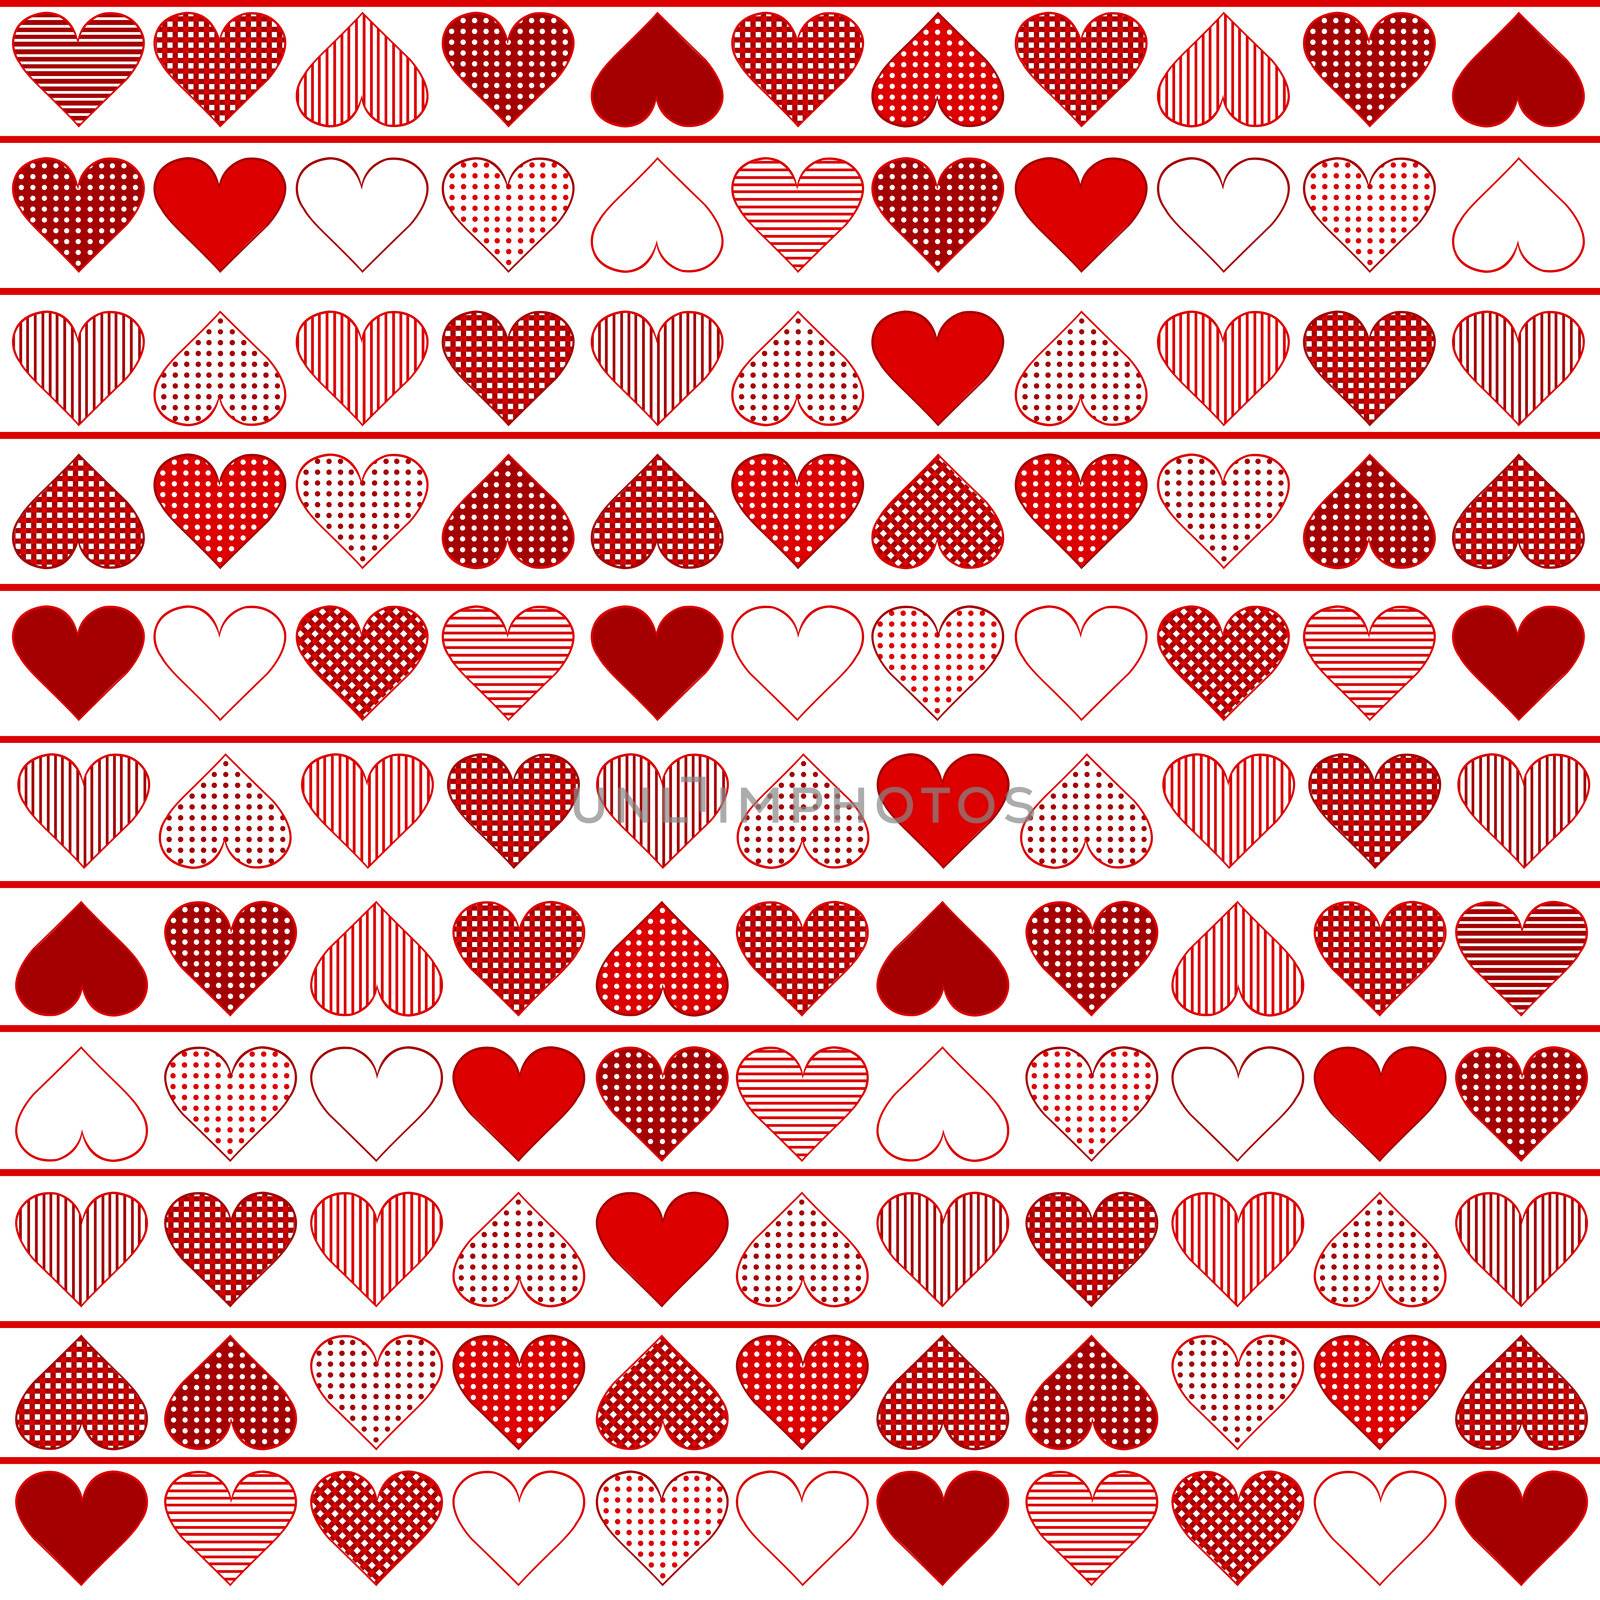 Background pattern with red hearts